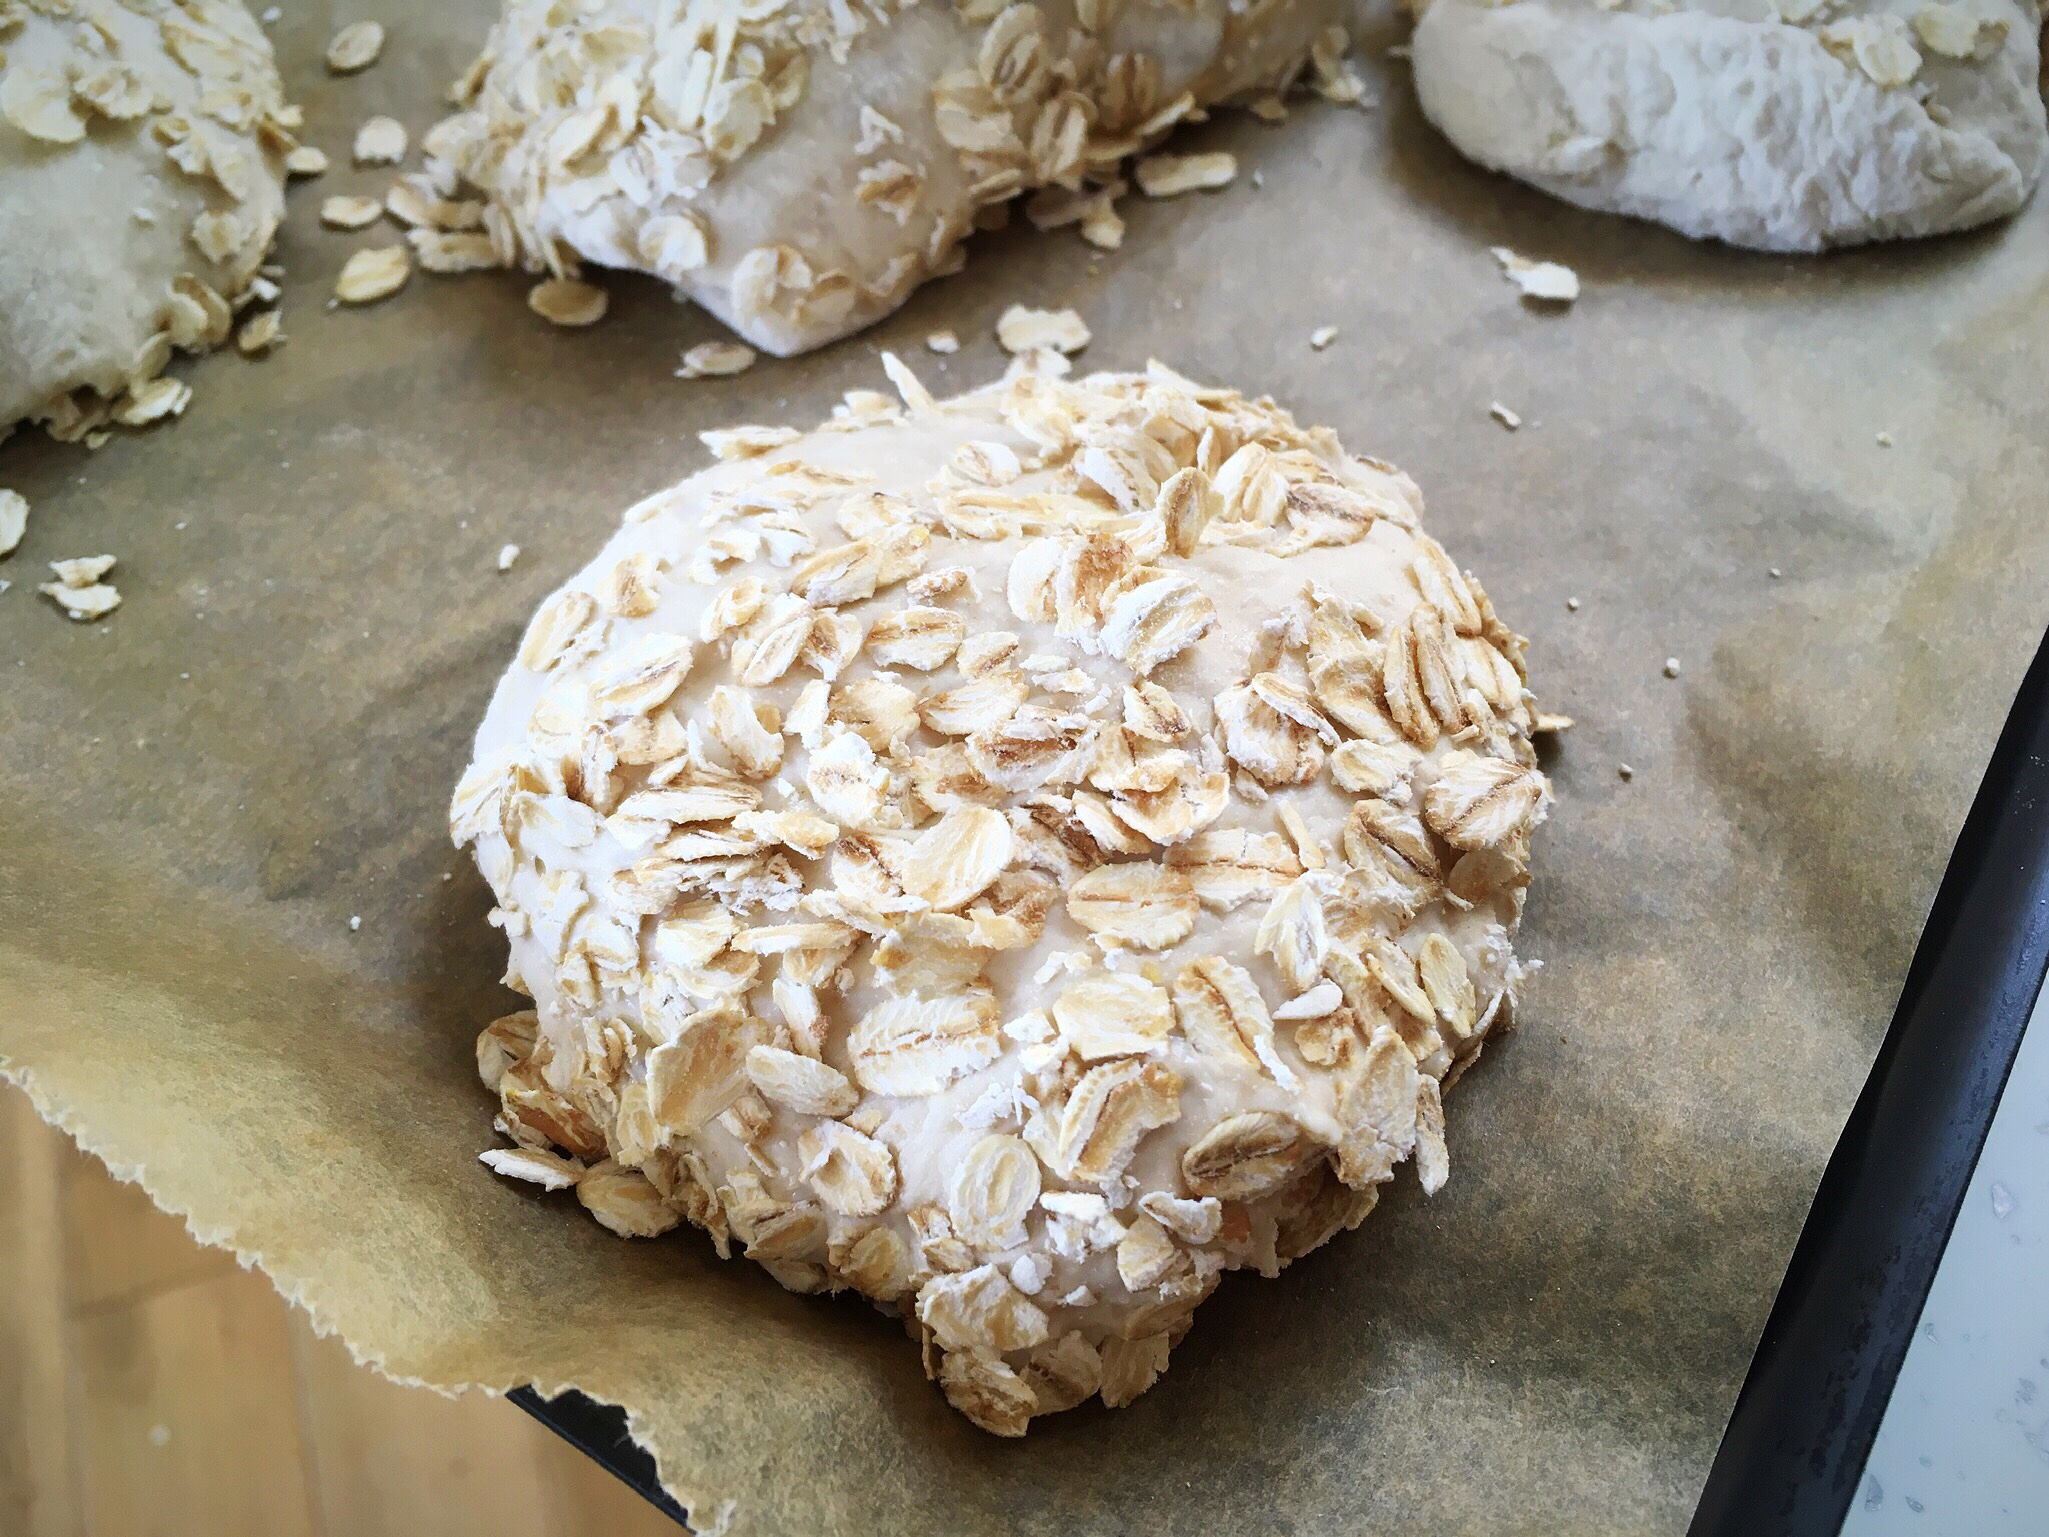 A round cake covered in white frosting and nuts.